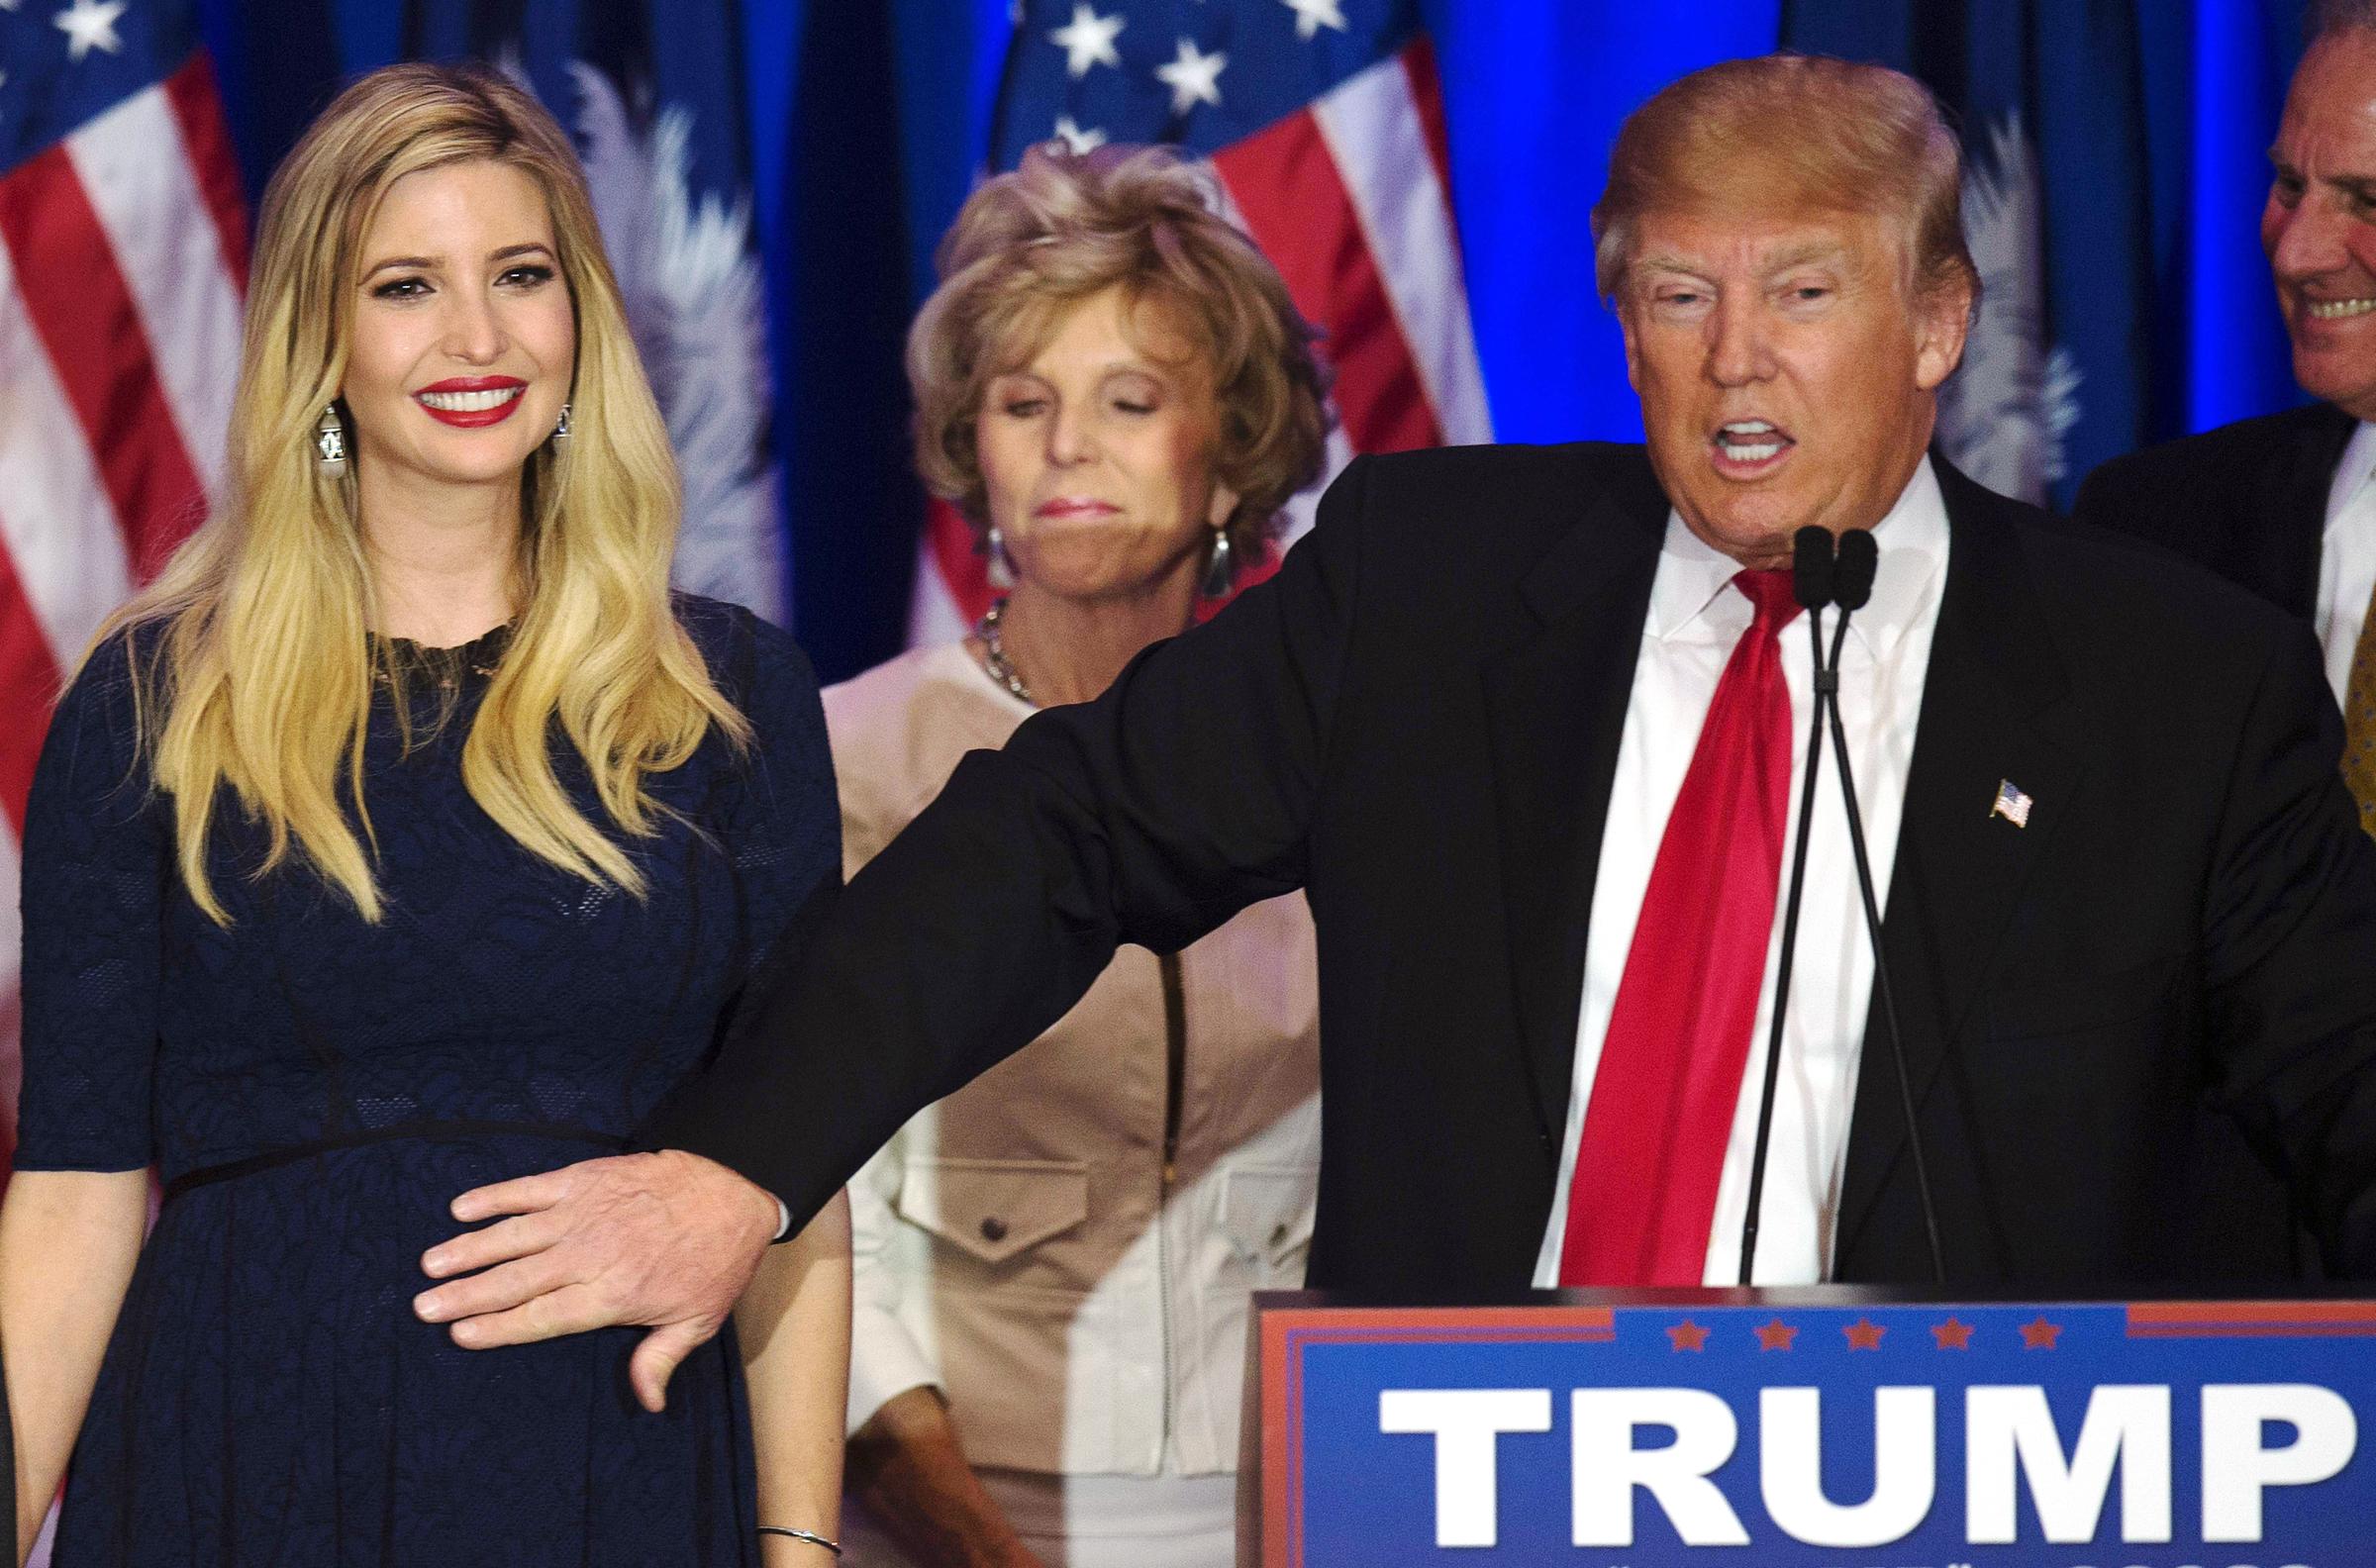 Republican presidential candidate Donald Trump pats the stomach of daughter Ivanka Trump, who is expecting a baby, in Spartanburg, S.C.